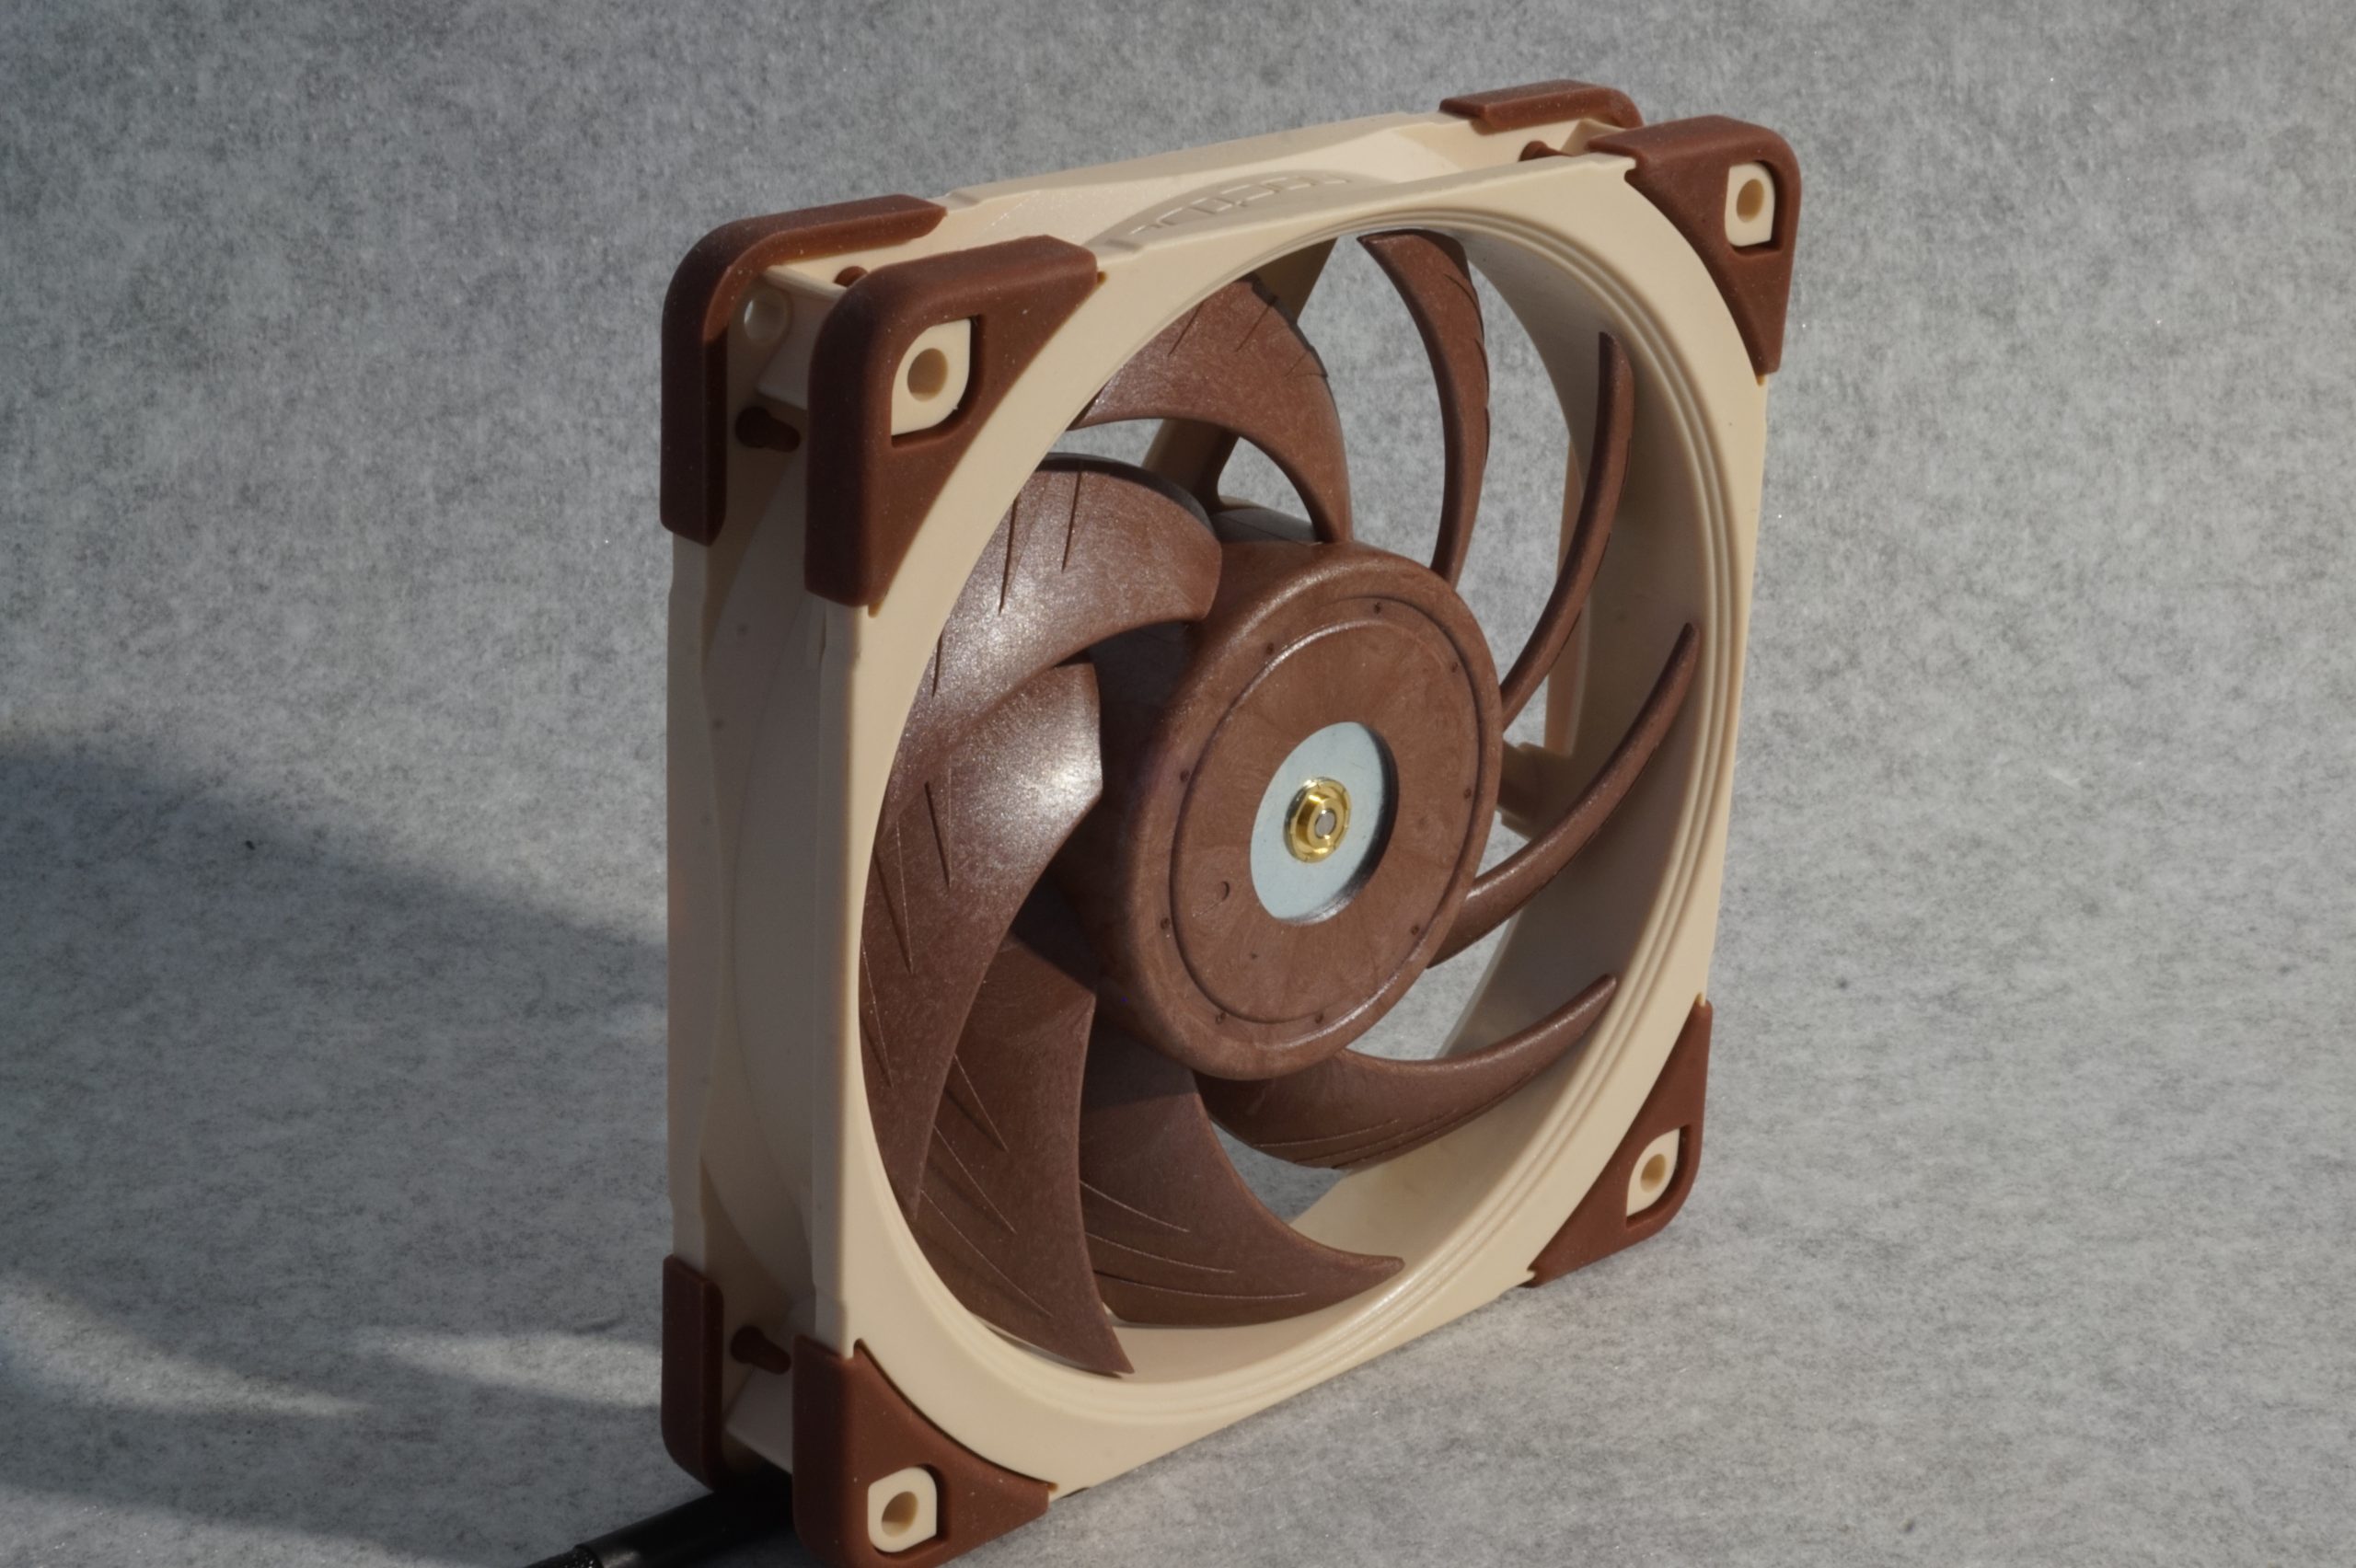 IgorsLab] Review with 6 case and radiator fans from be quiet!, Black Noise,  Corsair, Cooler Master, Noctua and Thermaltake : r/watercooling